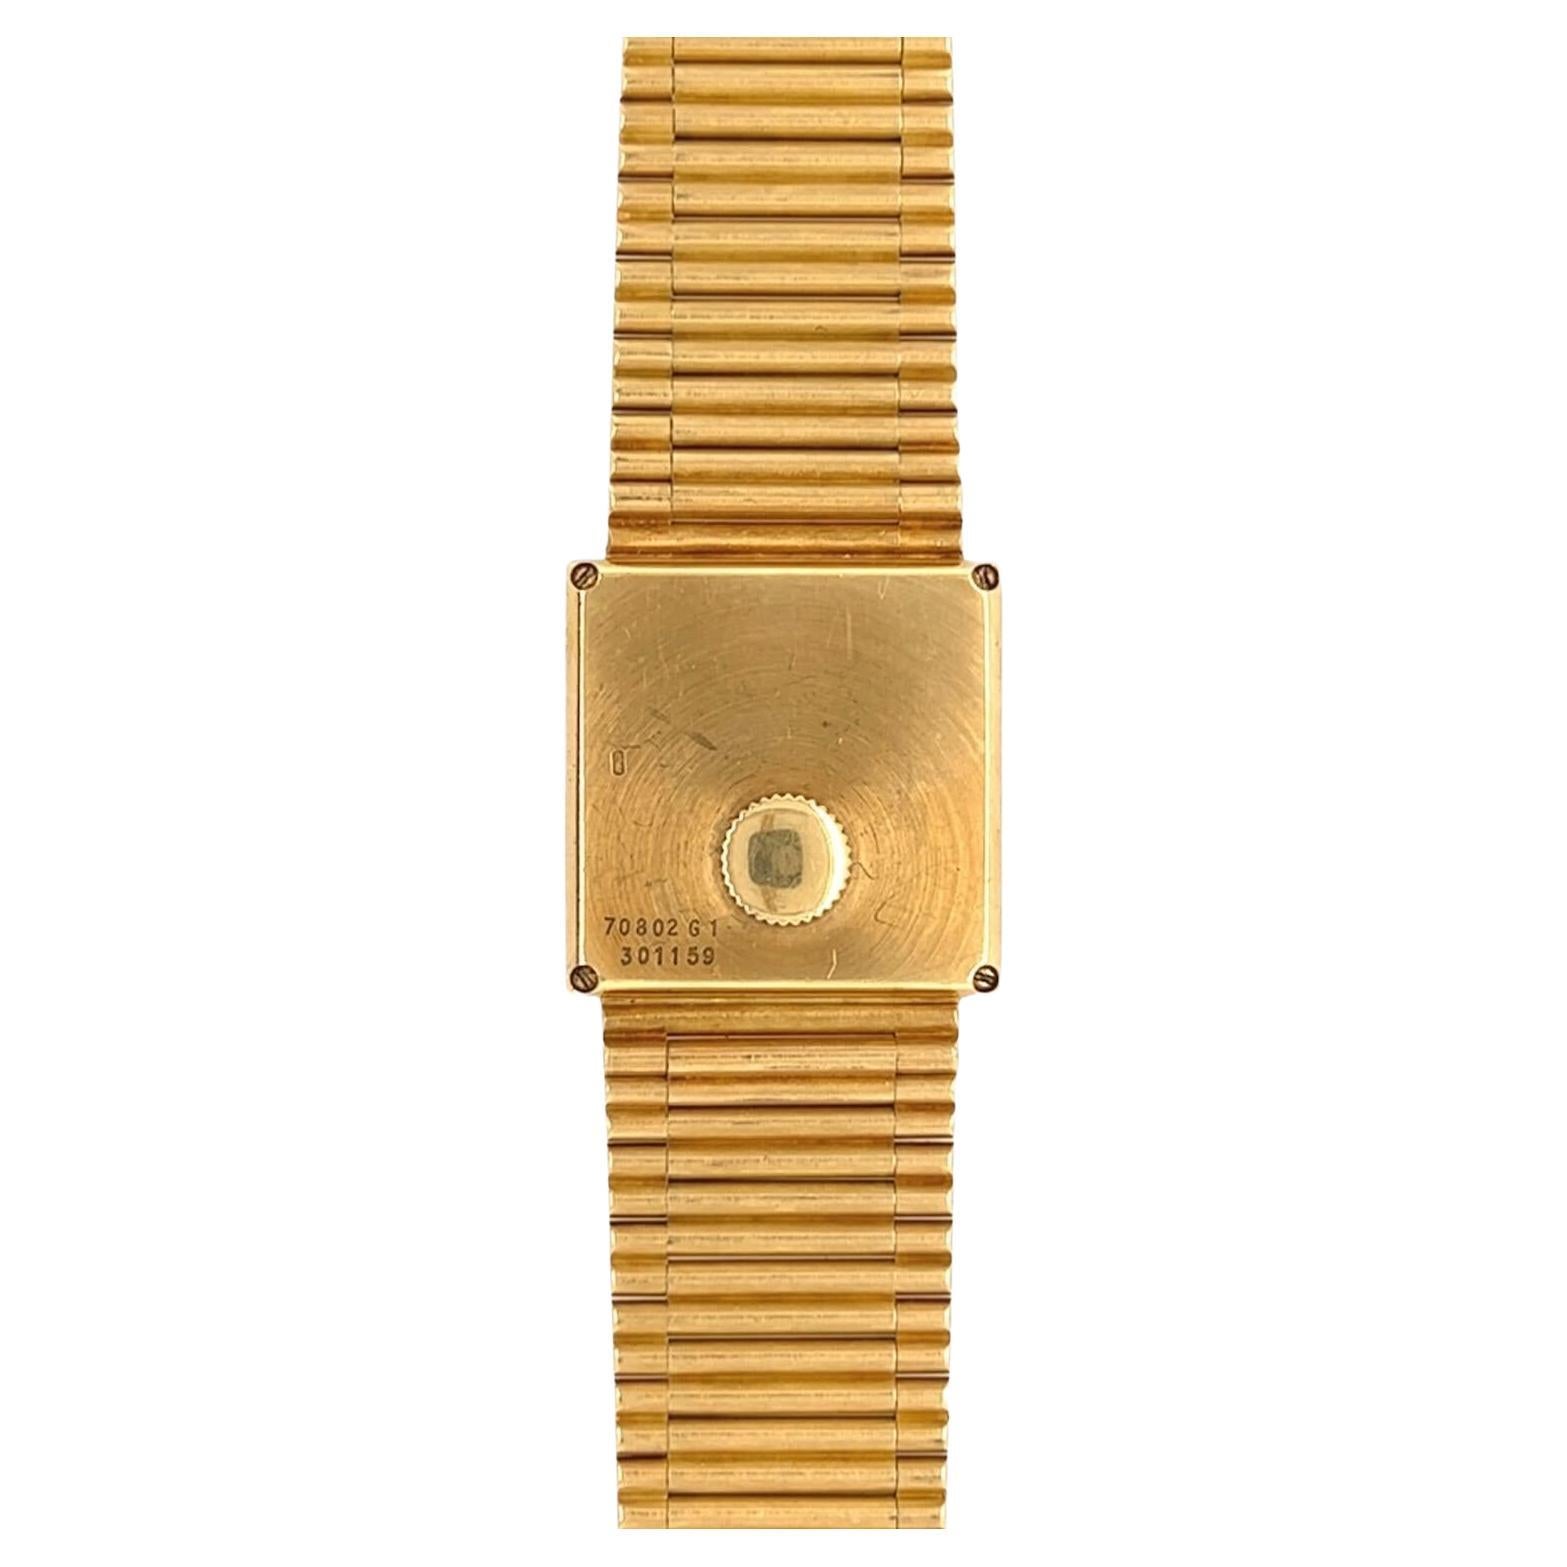 An 18 karat yellow gold watch, Piaget.  The square gold dial with dot markers for the hours and minutes within a simple square bezel measuring approximately 23 mm, completed by a bracelet of bar links.  Quartz movement.  Signed Piaget on the dial